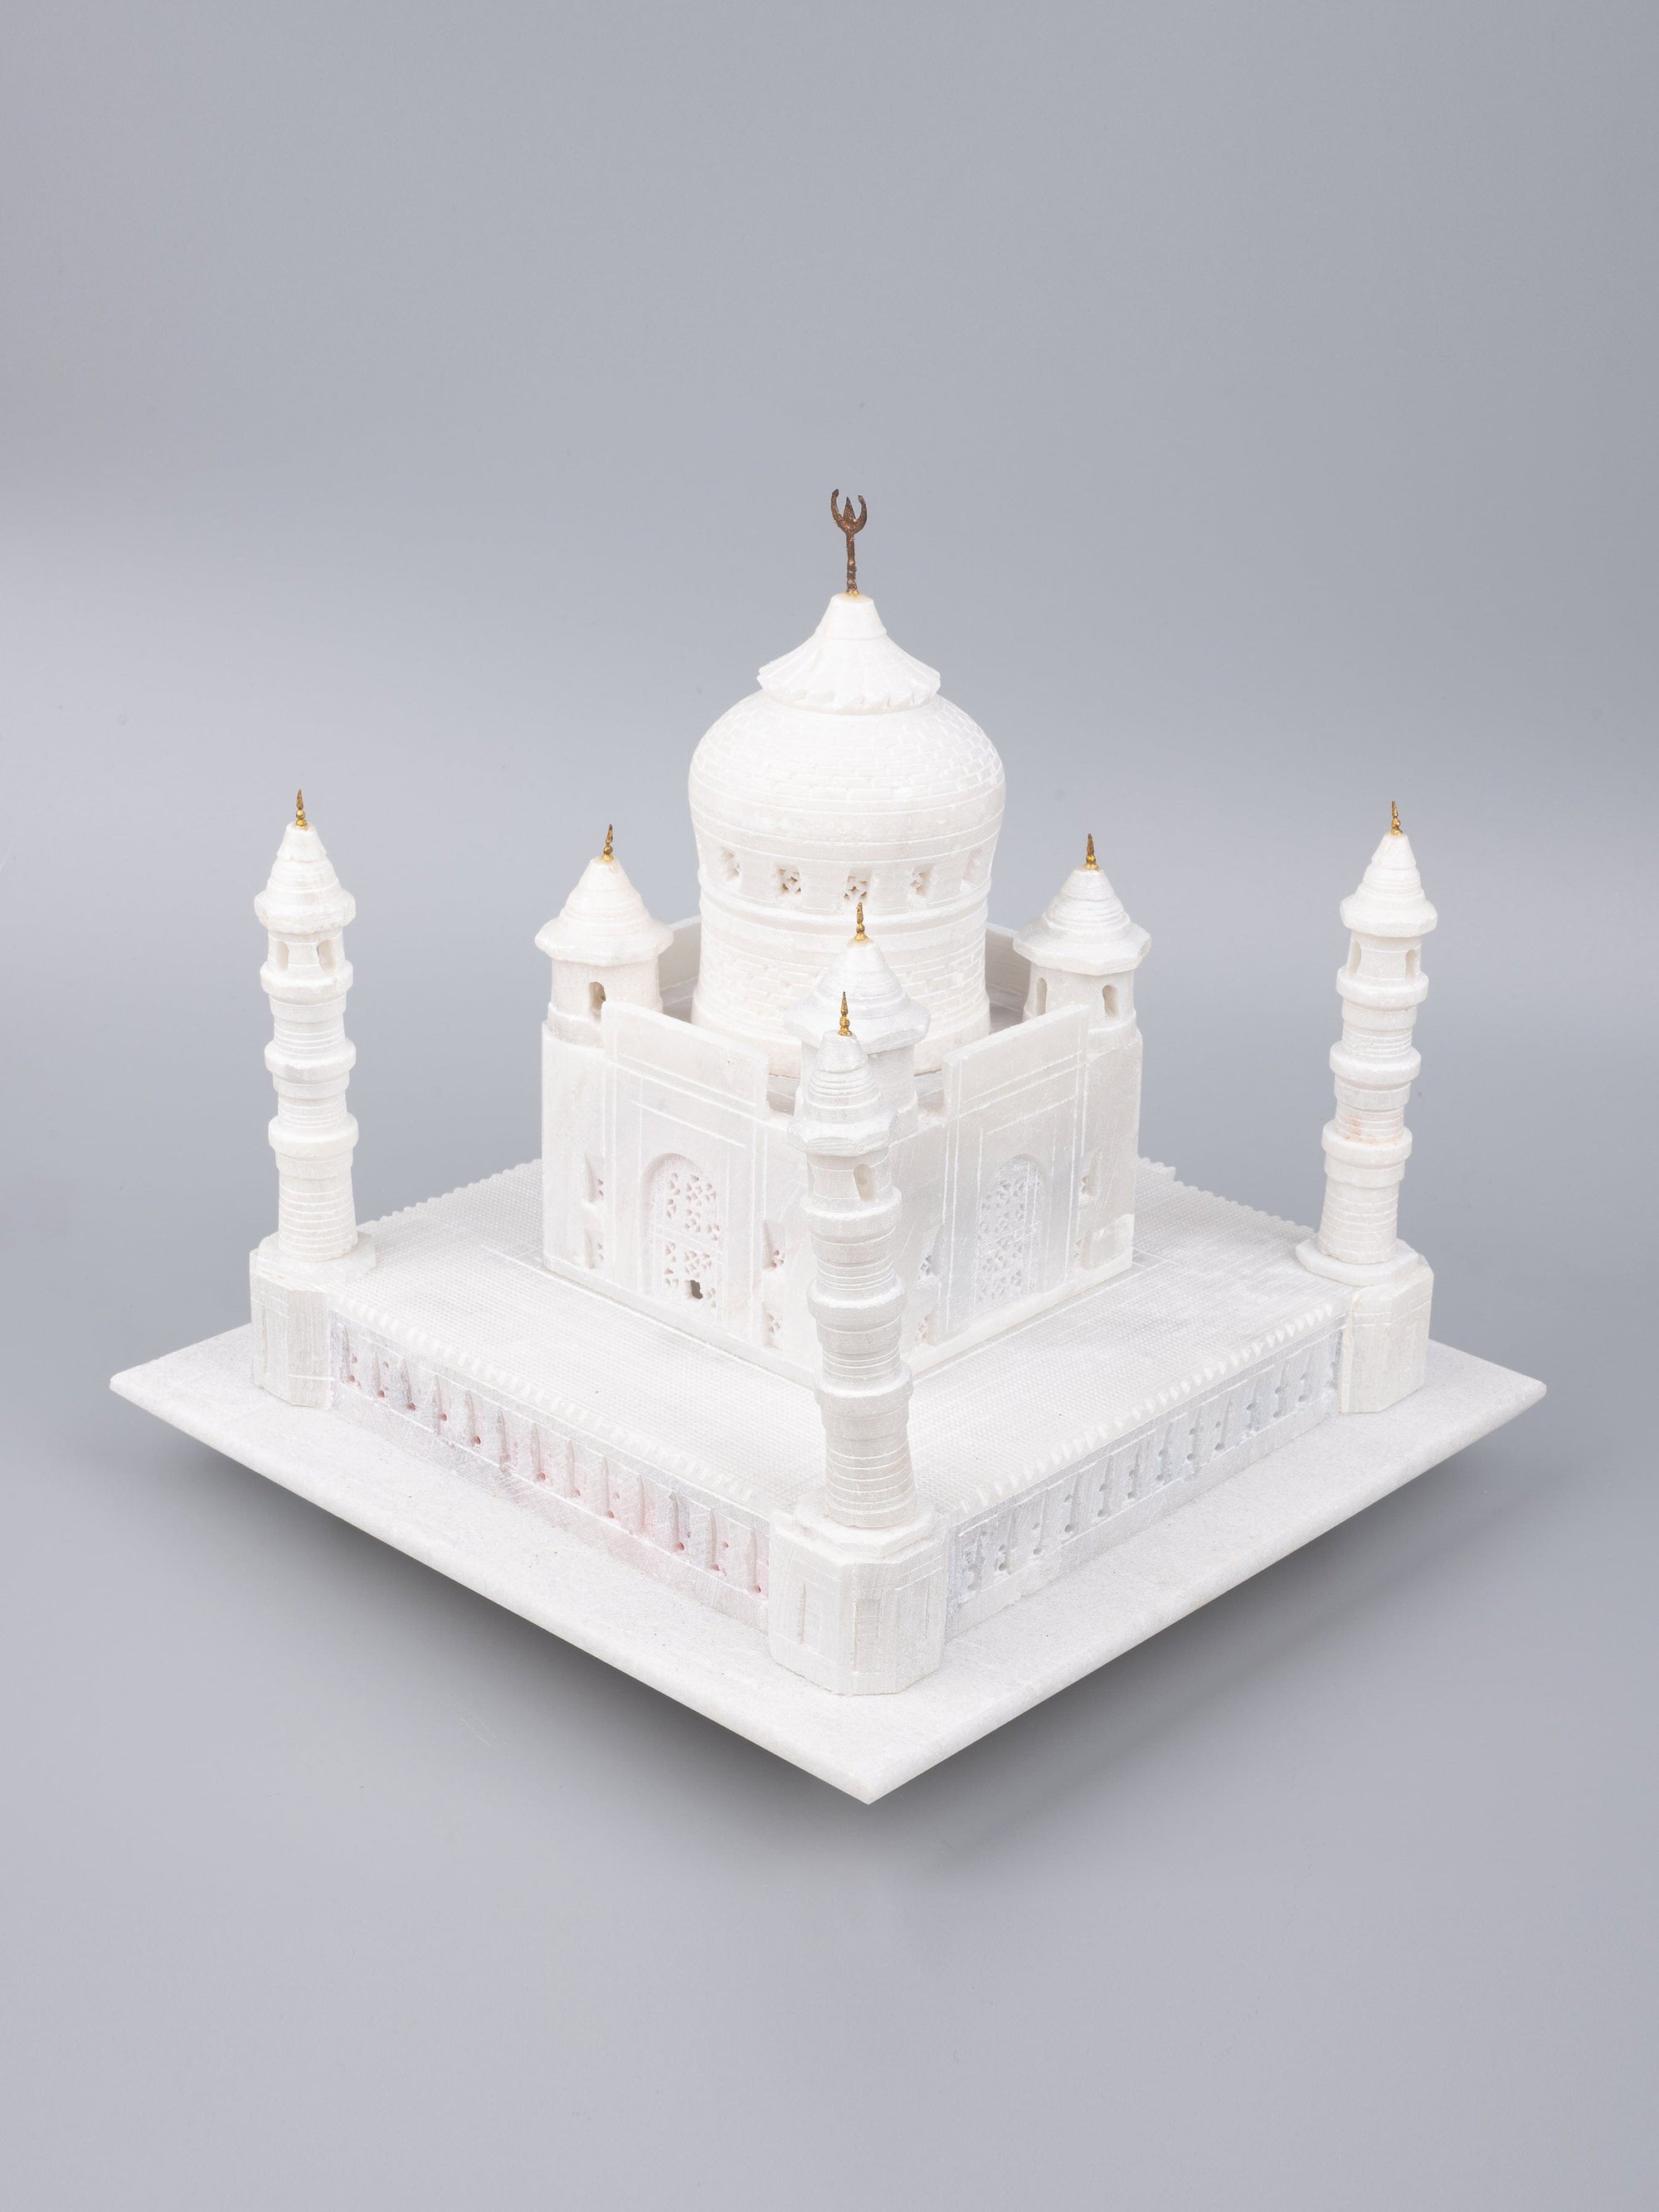 6 inches decorative replica of Taj Mahal in white marble - The Heritage Artifacts